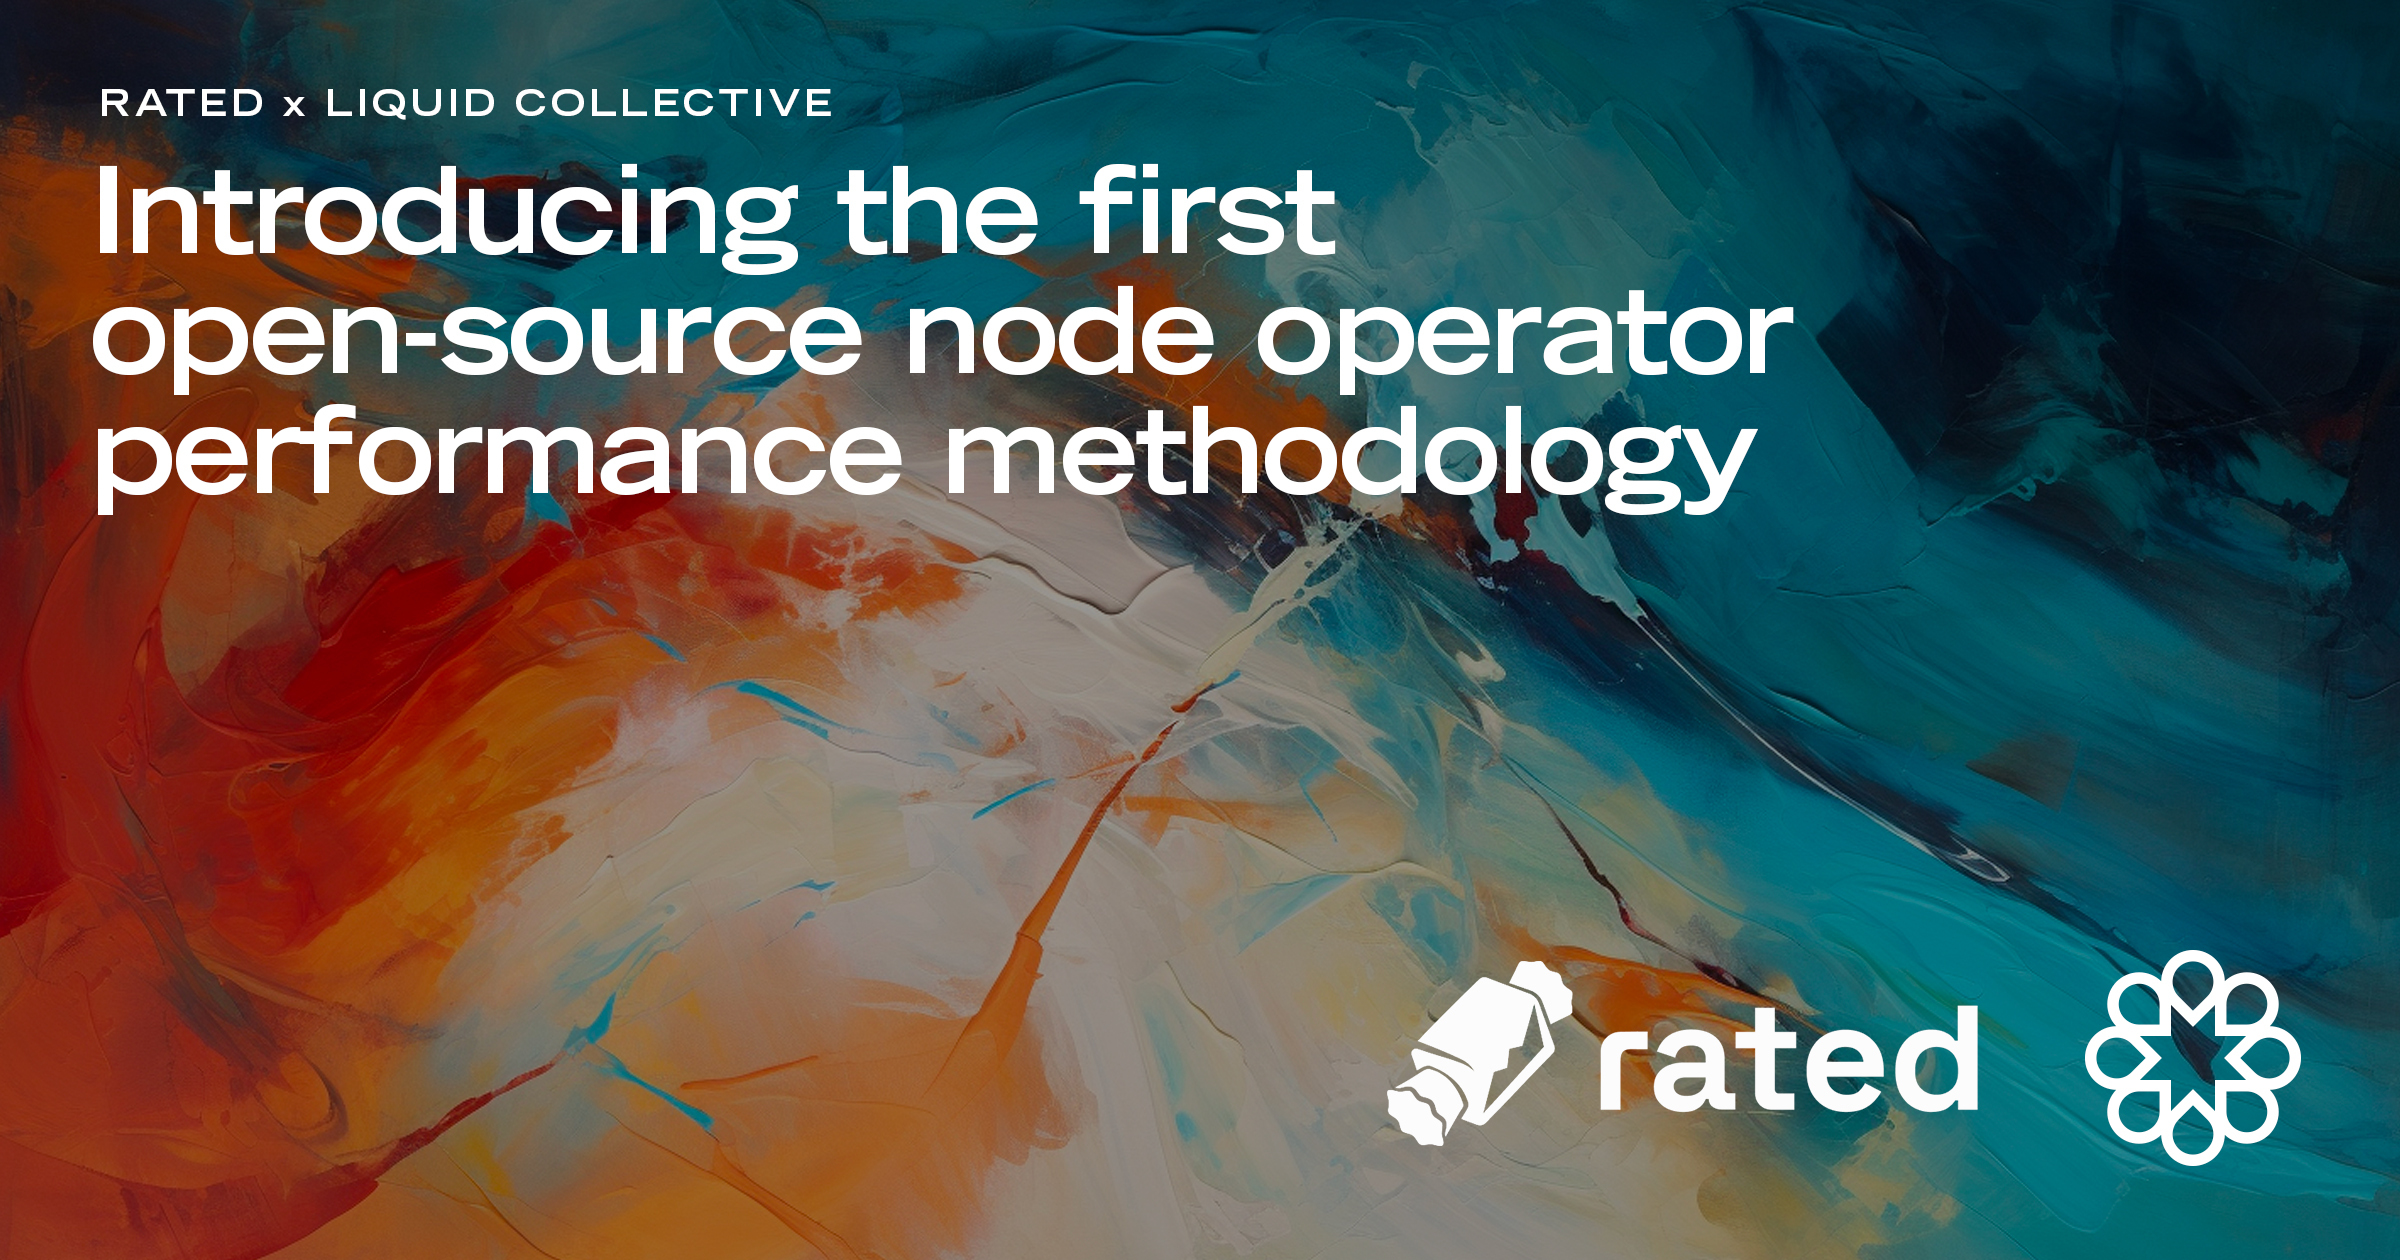 Introducing the first open node operator performance methodology